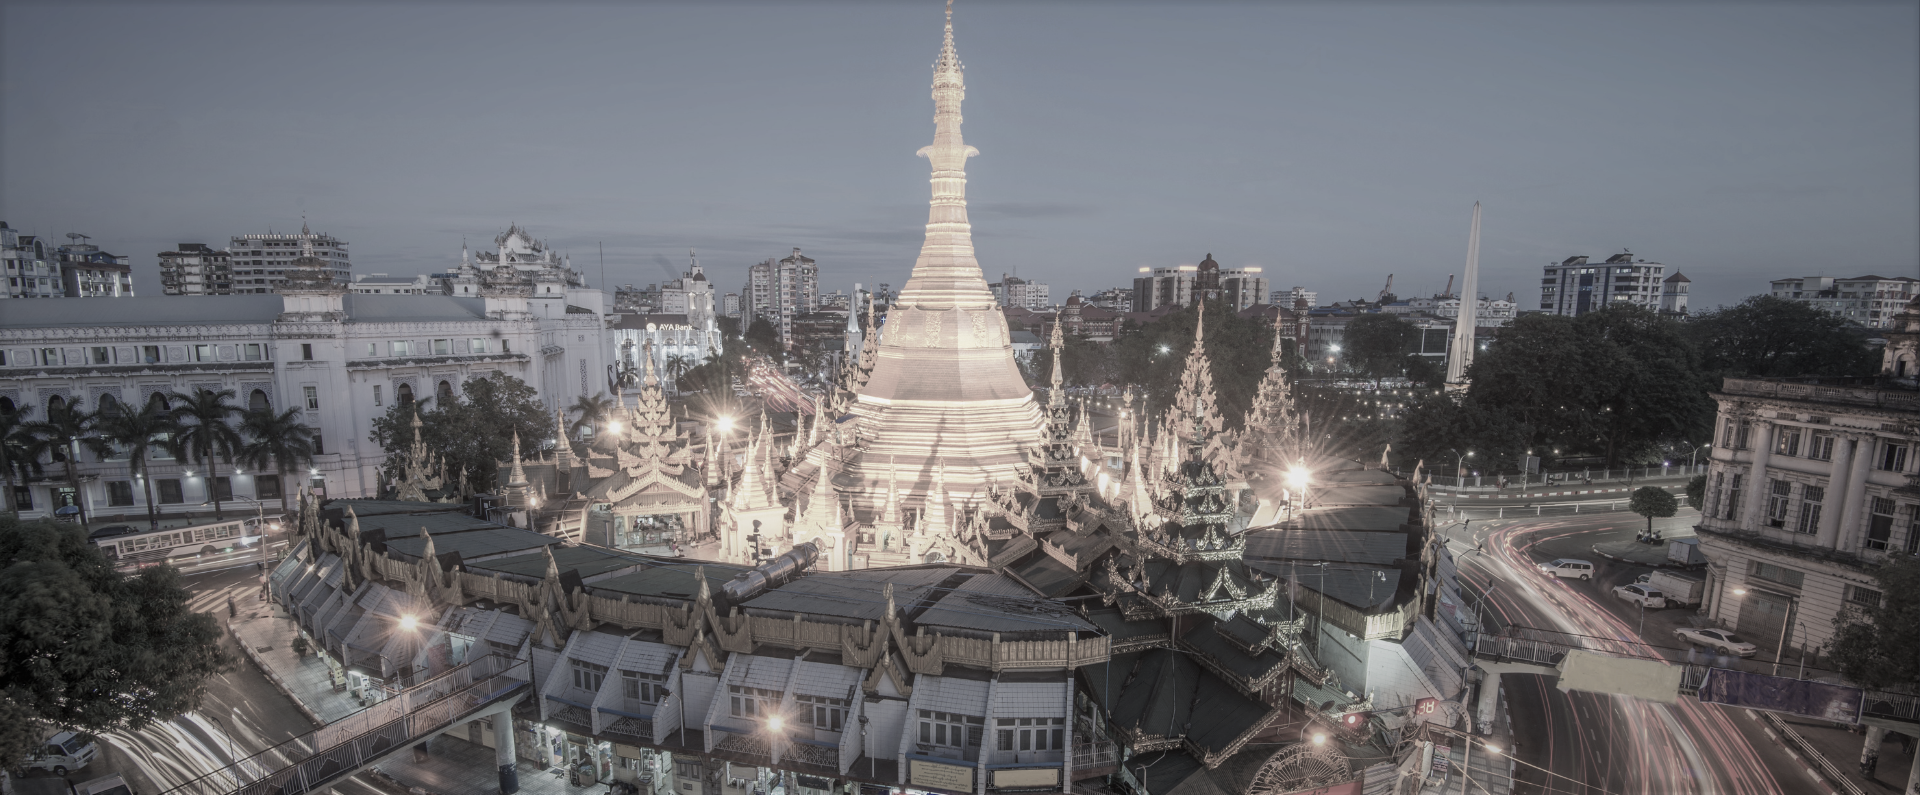 thumbnails (Virtual) Latest Security Update in Myanmar